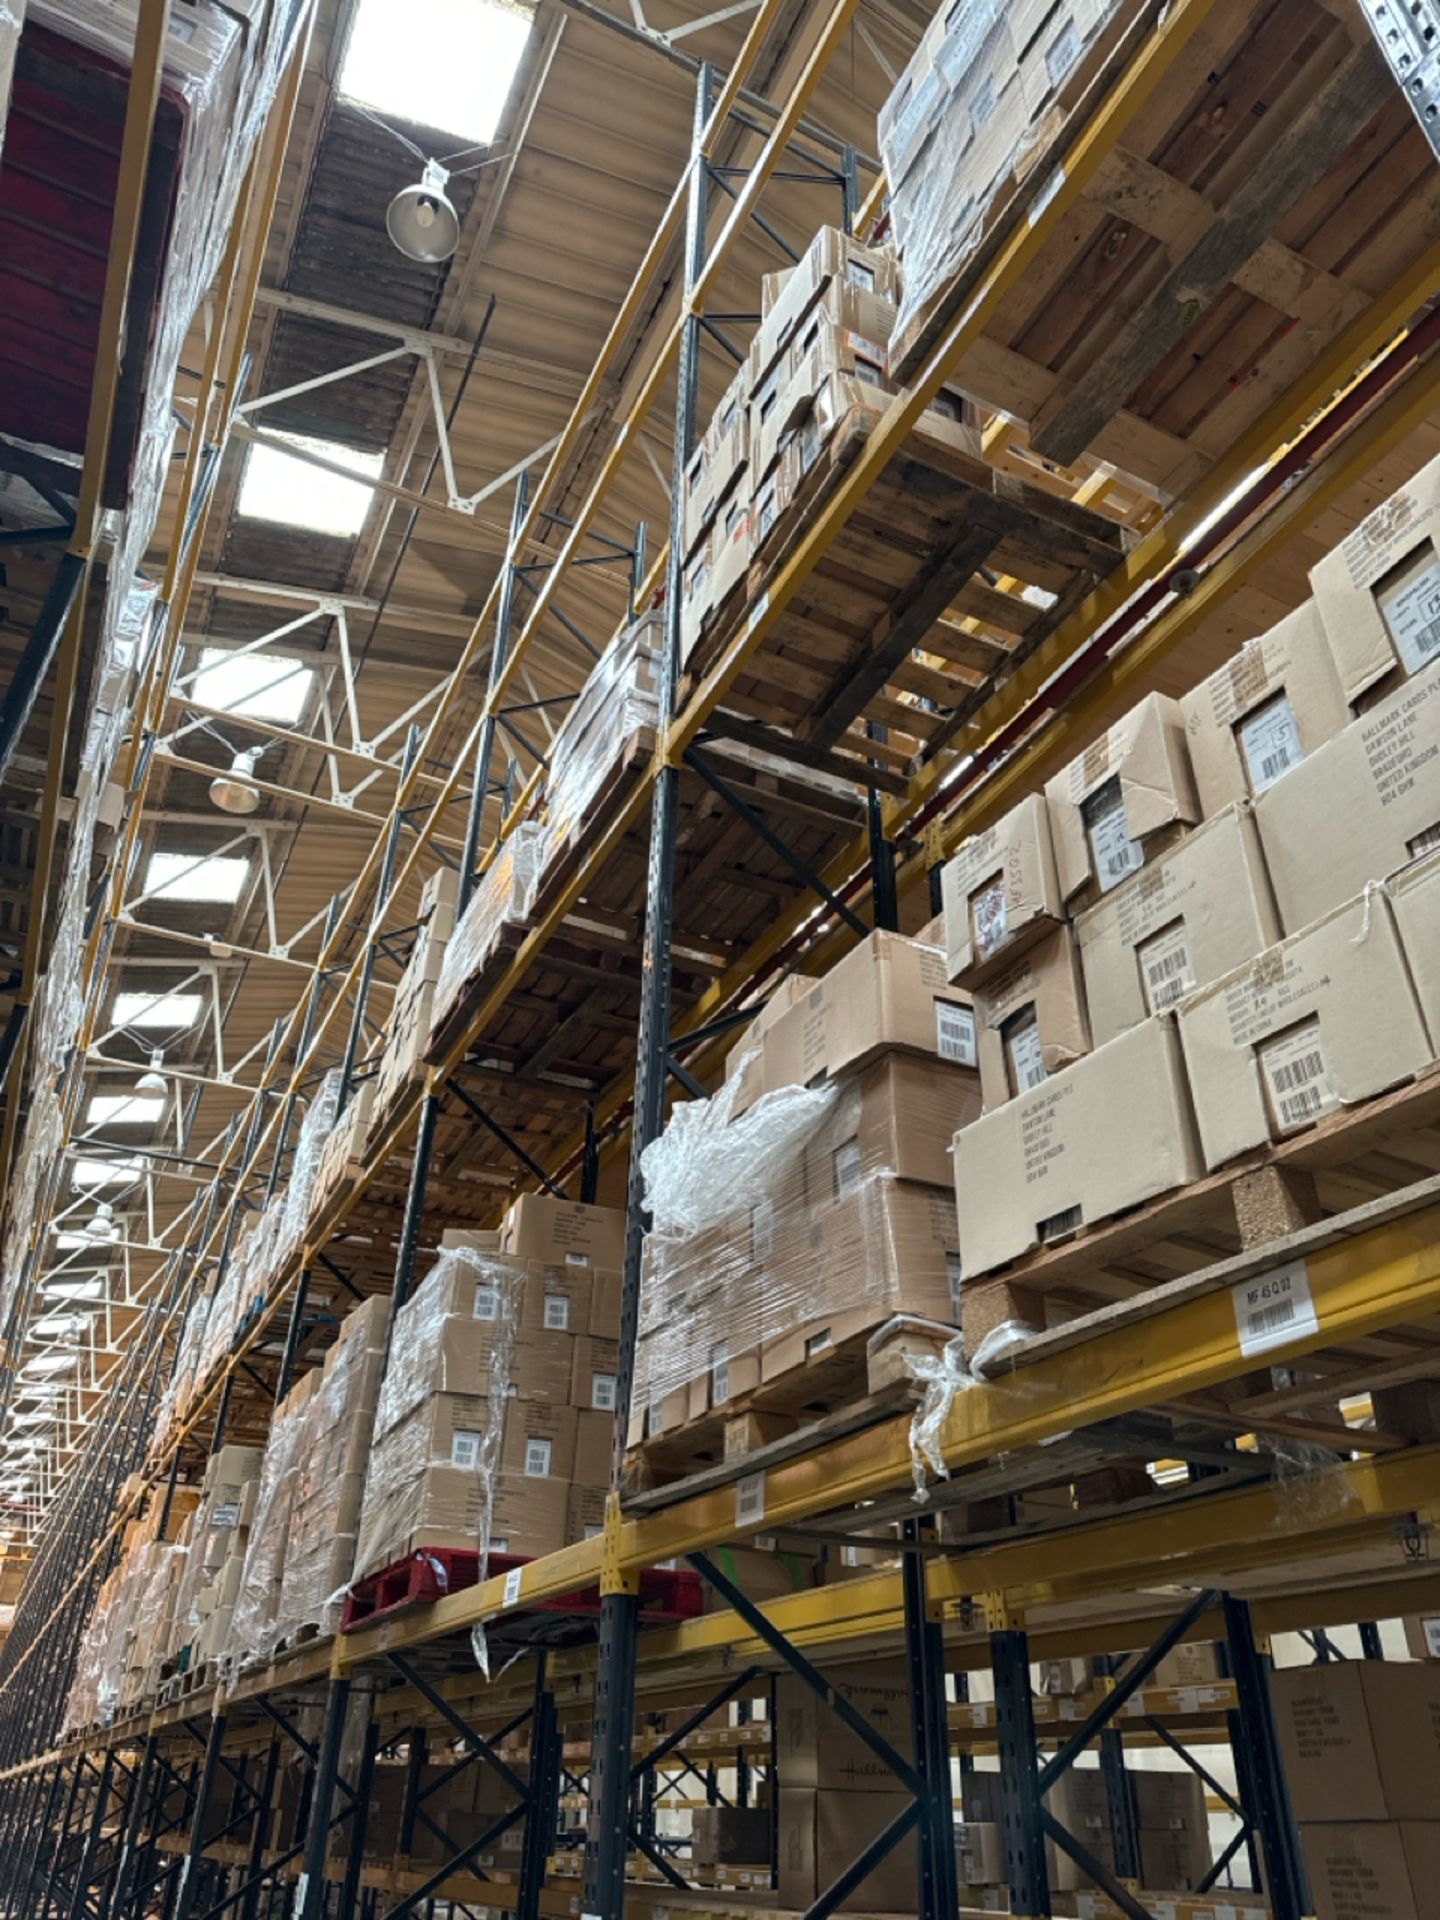 Run Of 46 Bays Of Back To Back Boltless Industrial Pallet Racking - Image 5 of 12